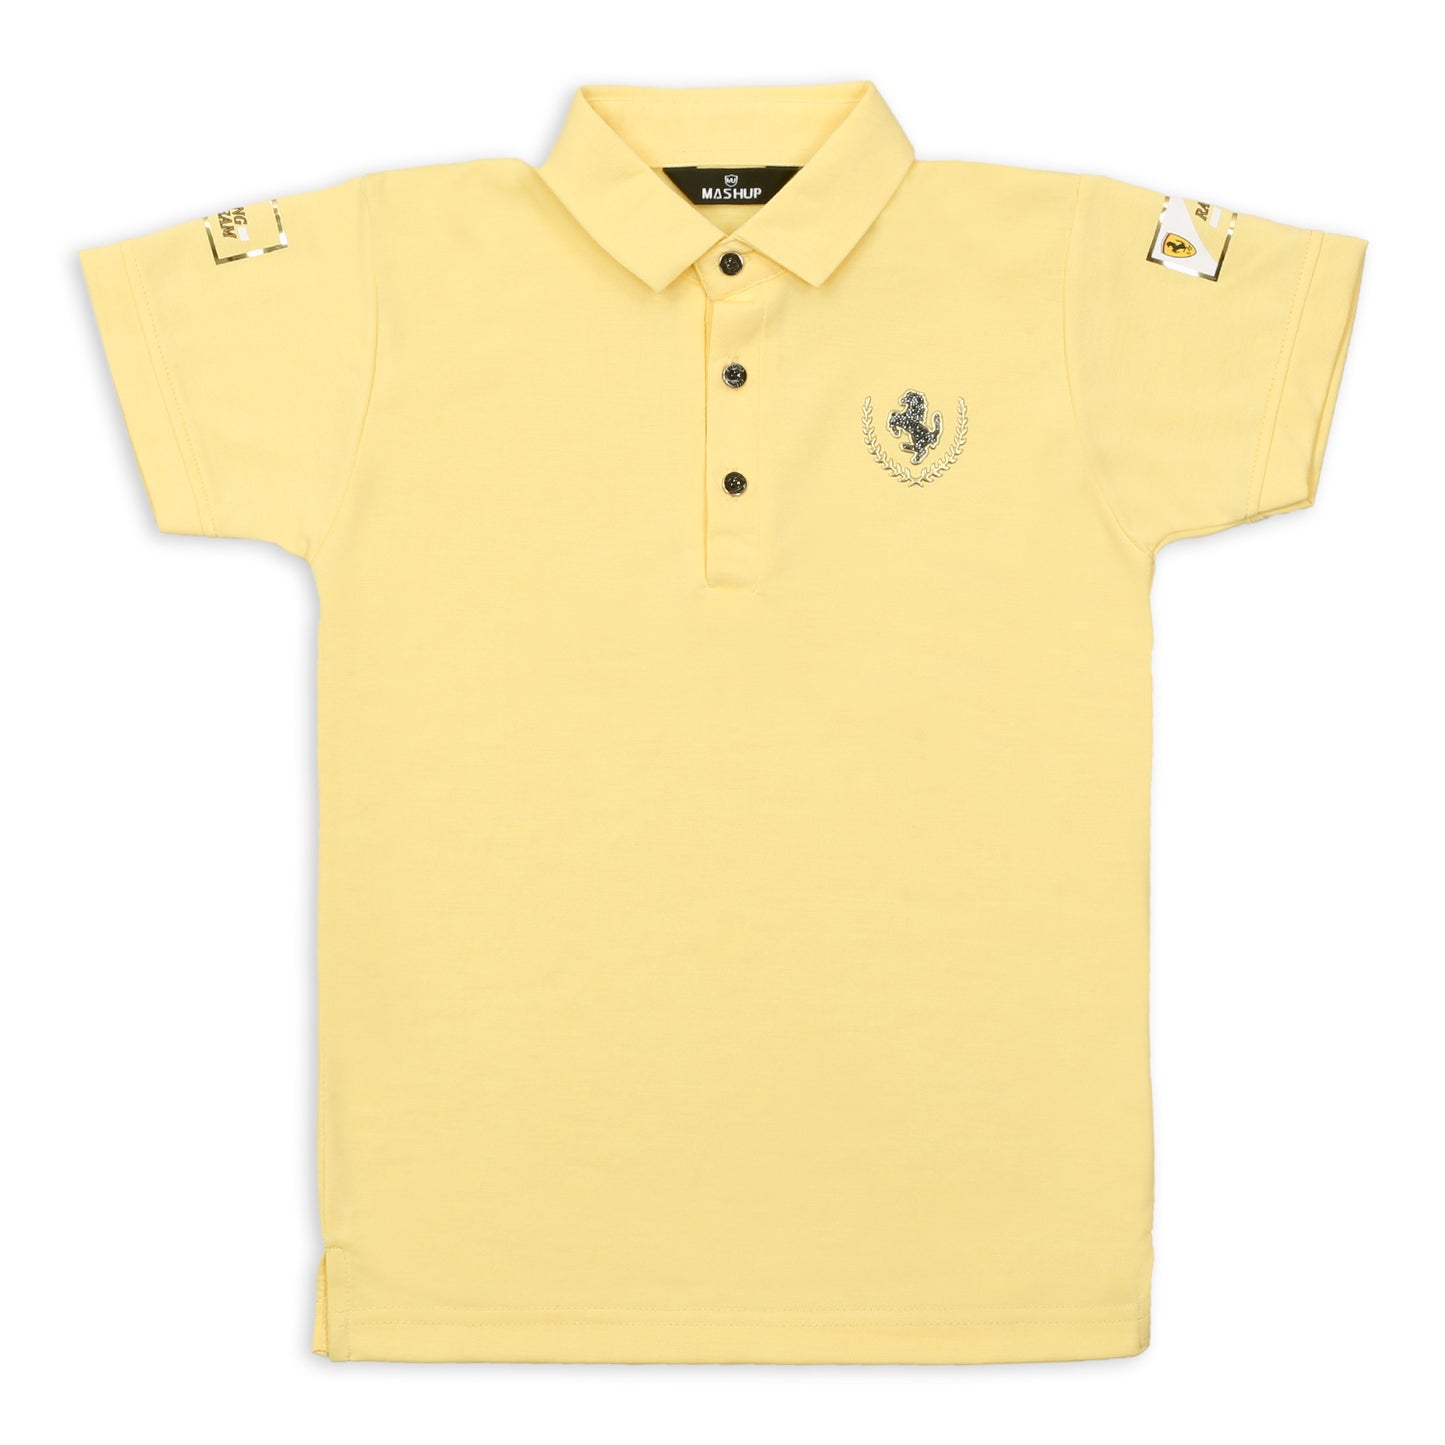 Youthful Elegance: Unveil the Uncommon in Boys' Casual Polo Tees!